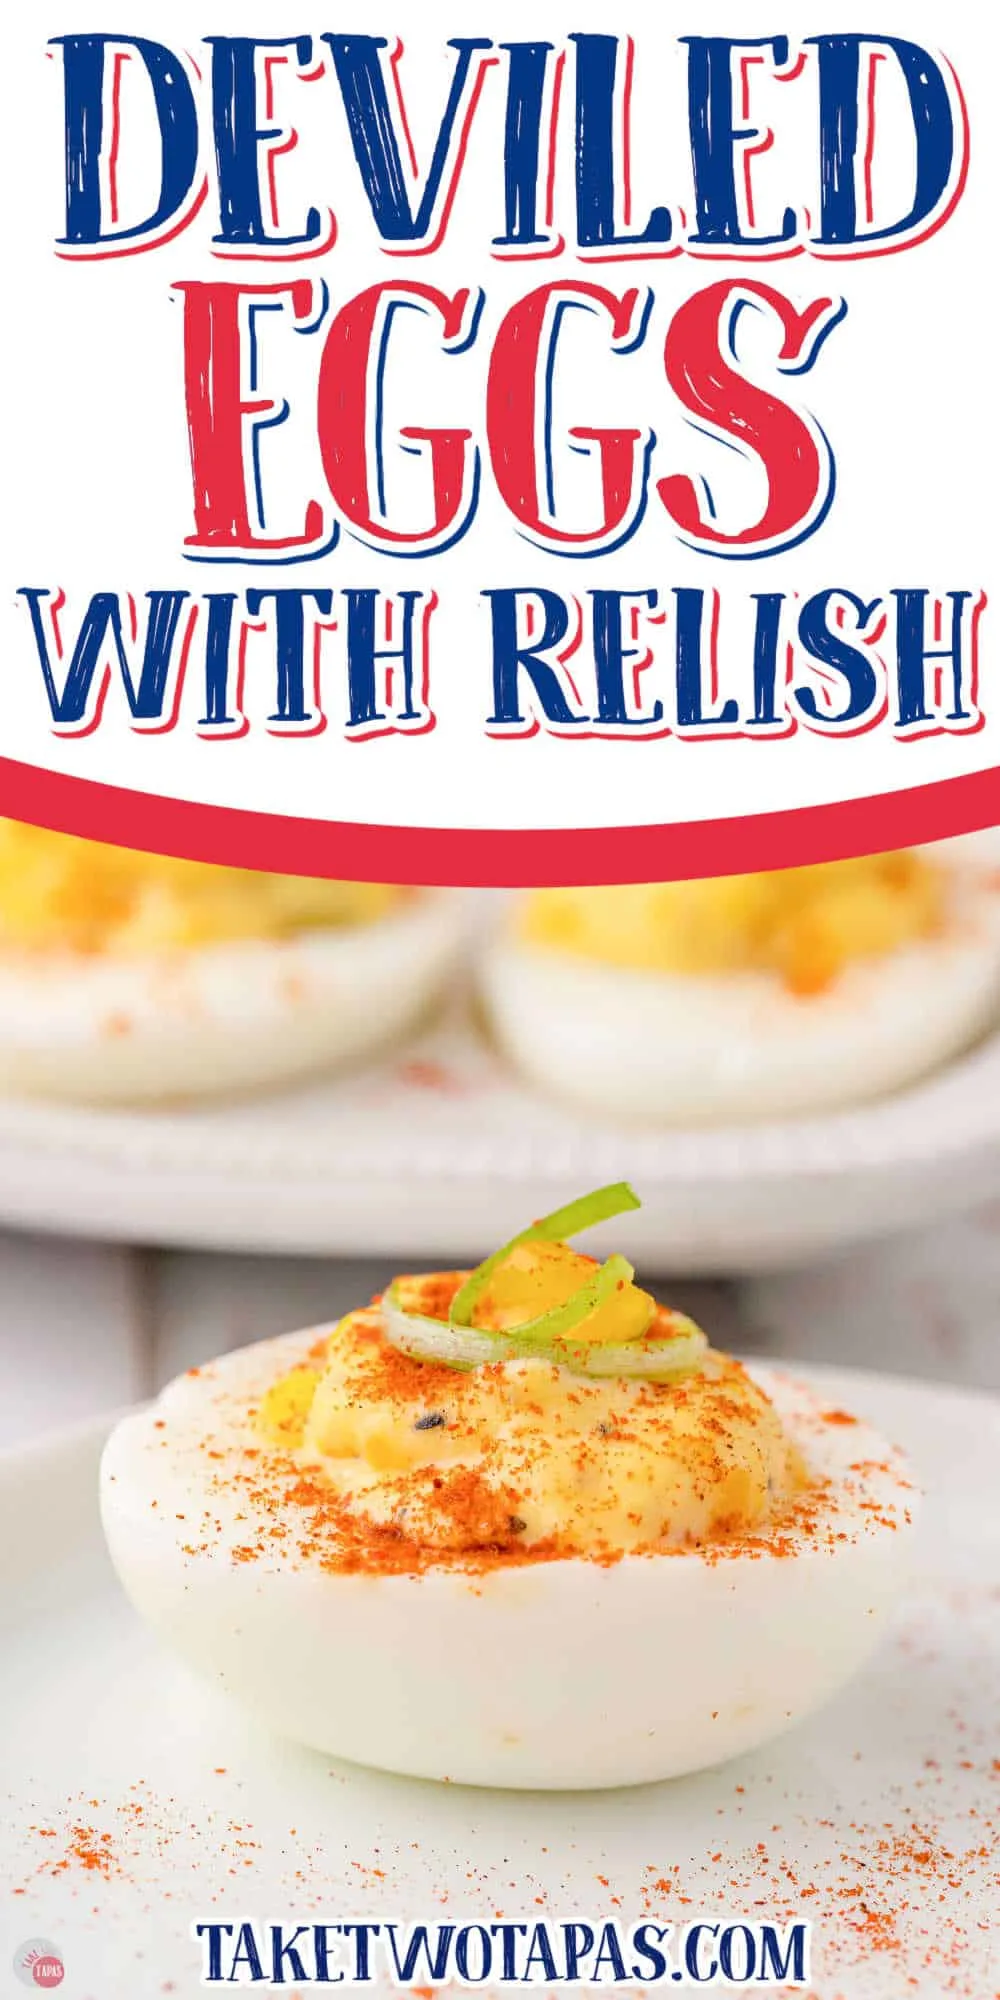 deviled egg with white banner and red and blue text